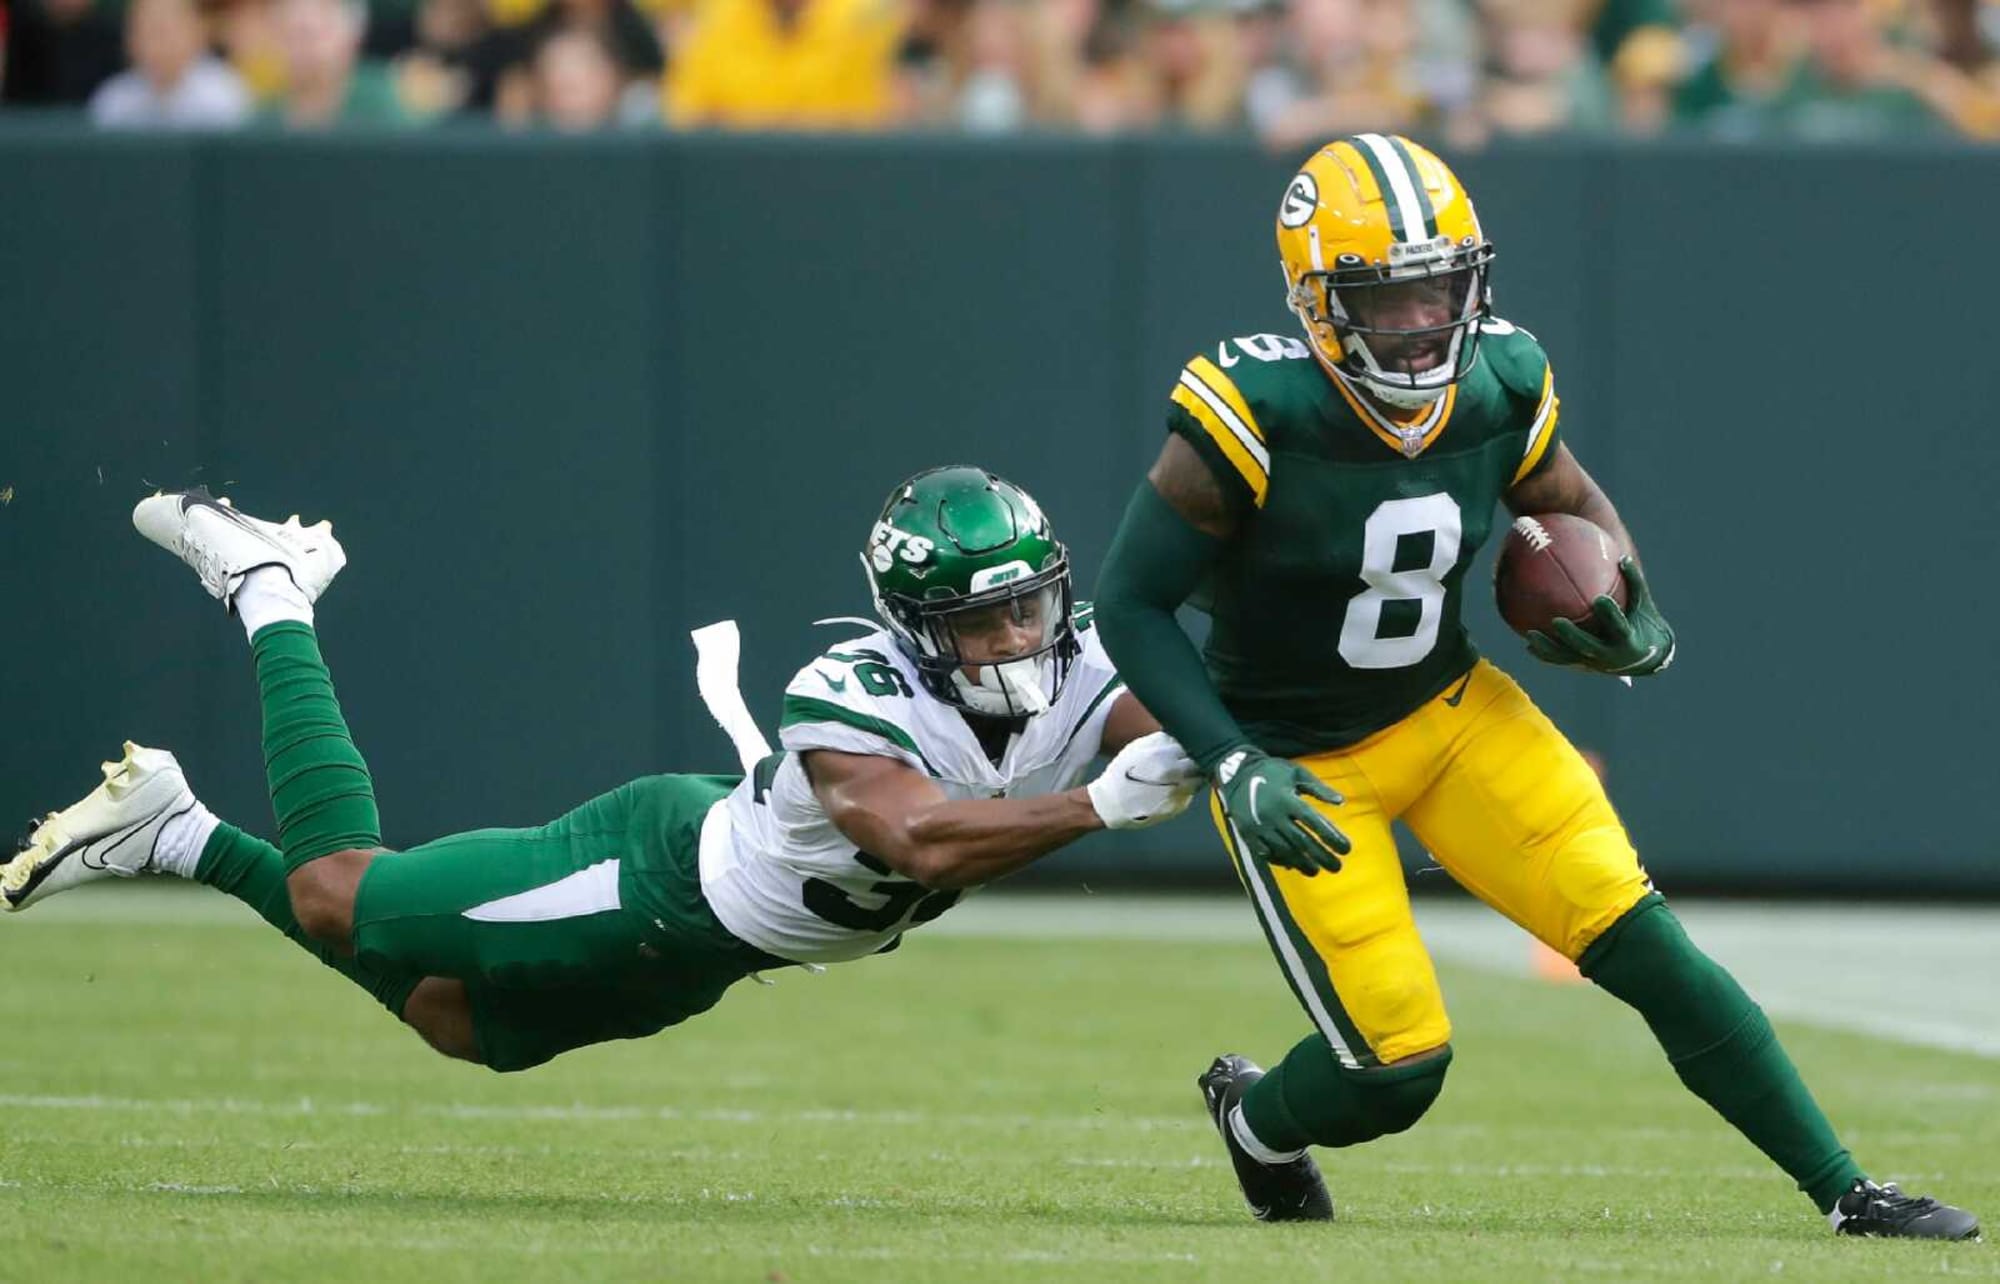 Amari Rodgers makes a run after a catch in a preseason game against the New York Jets